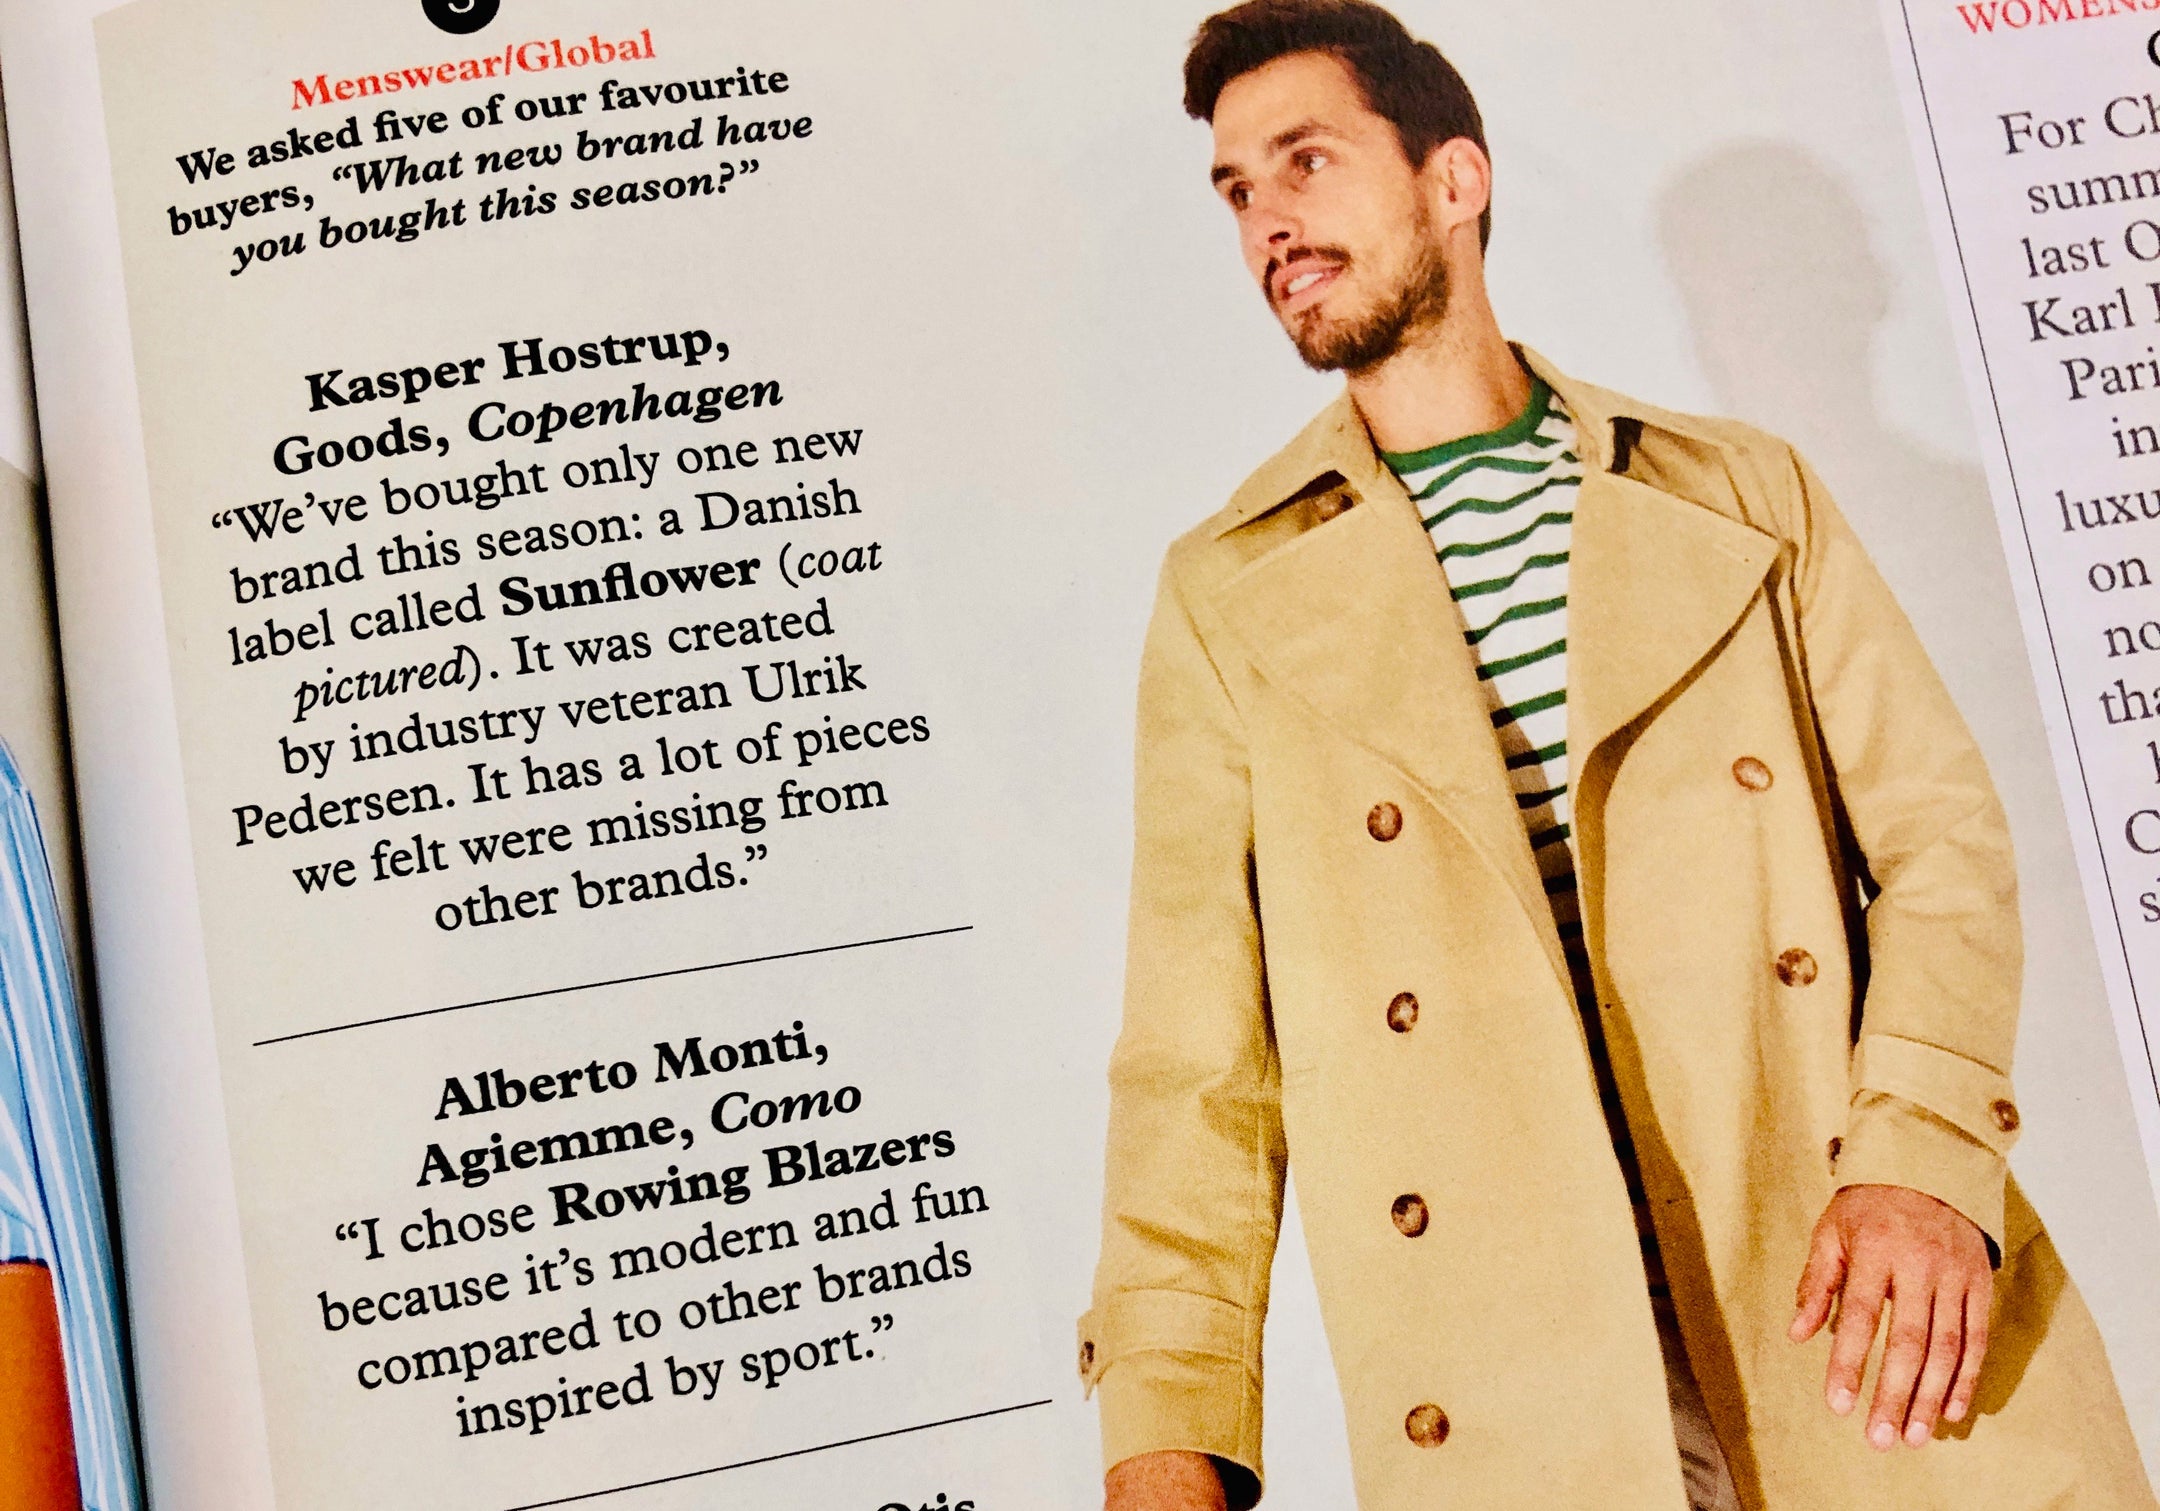 Rowing Blazers in Monocle (Recently we were featured in Monocle courtesy of A.Gi.Emme)